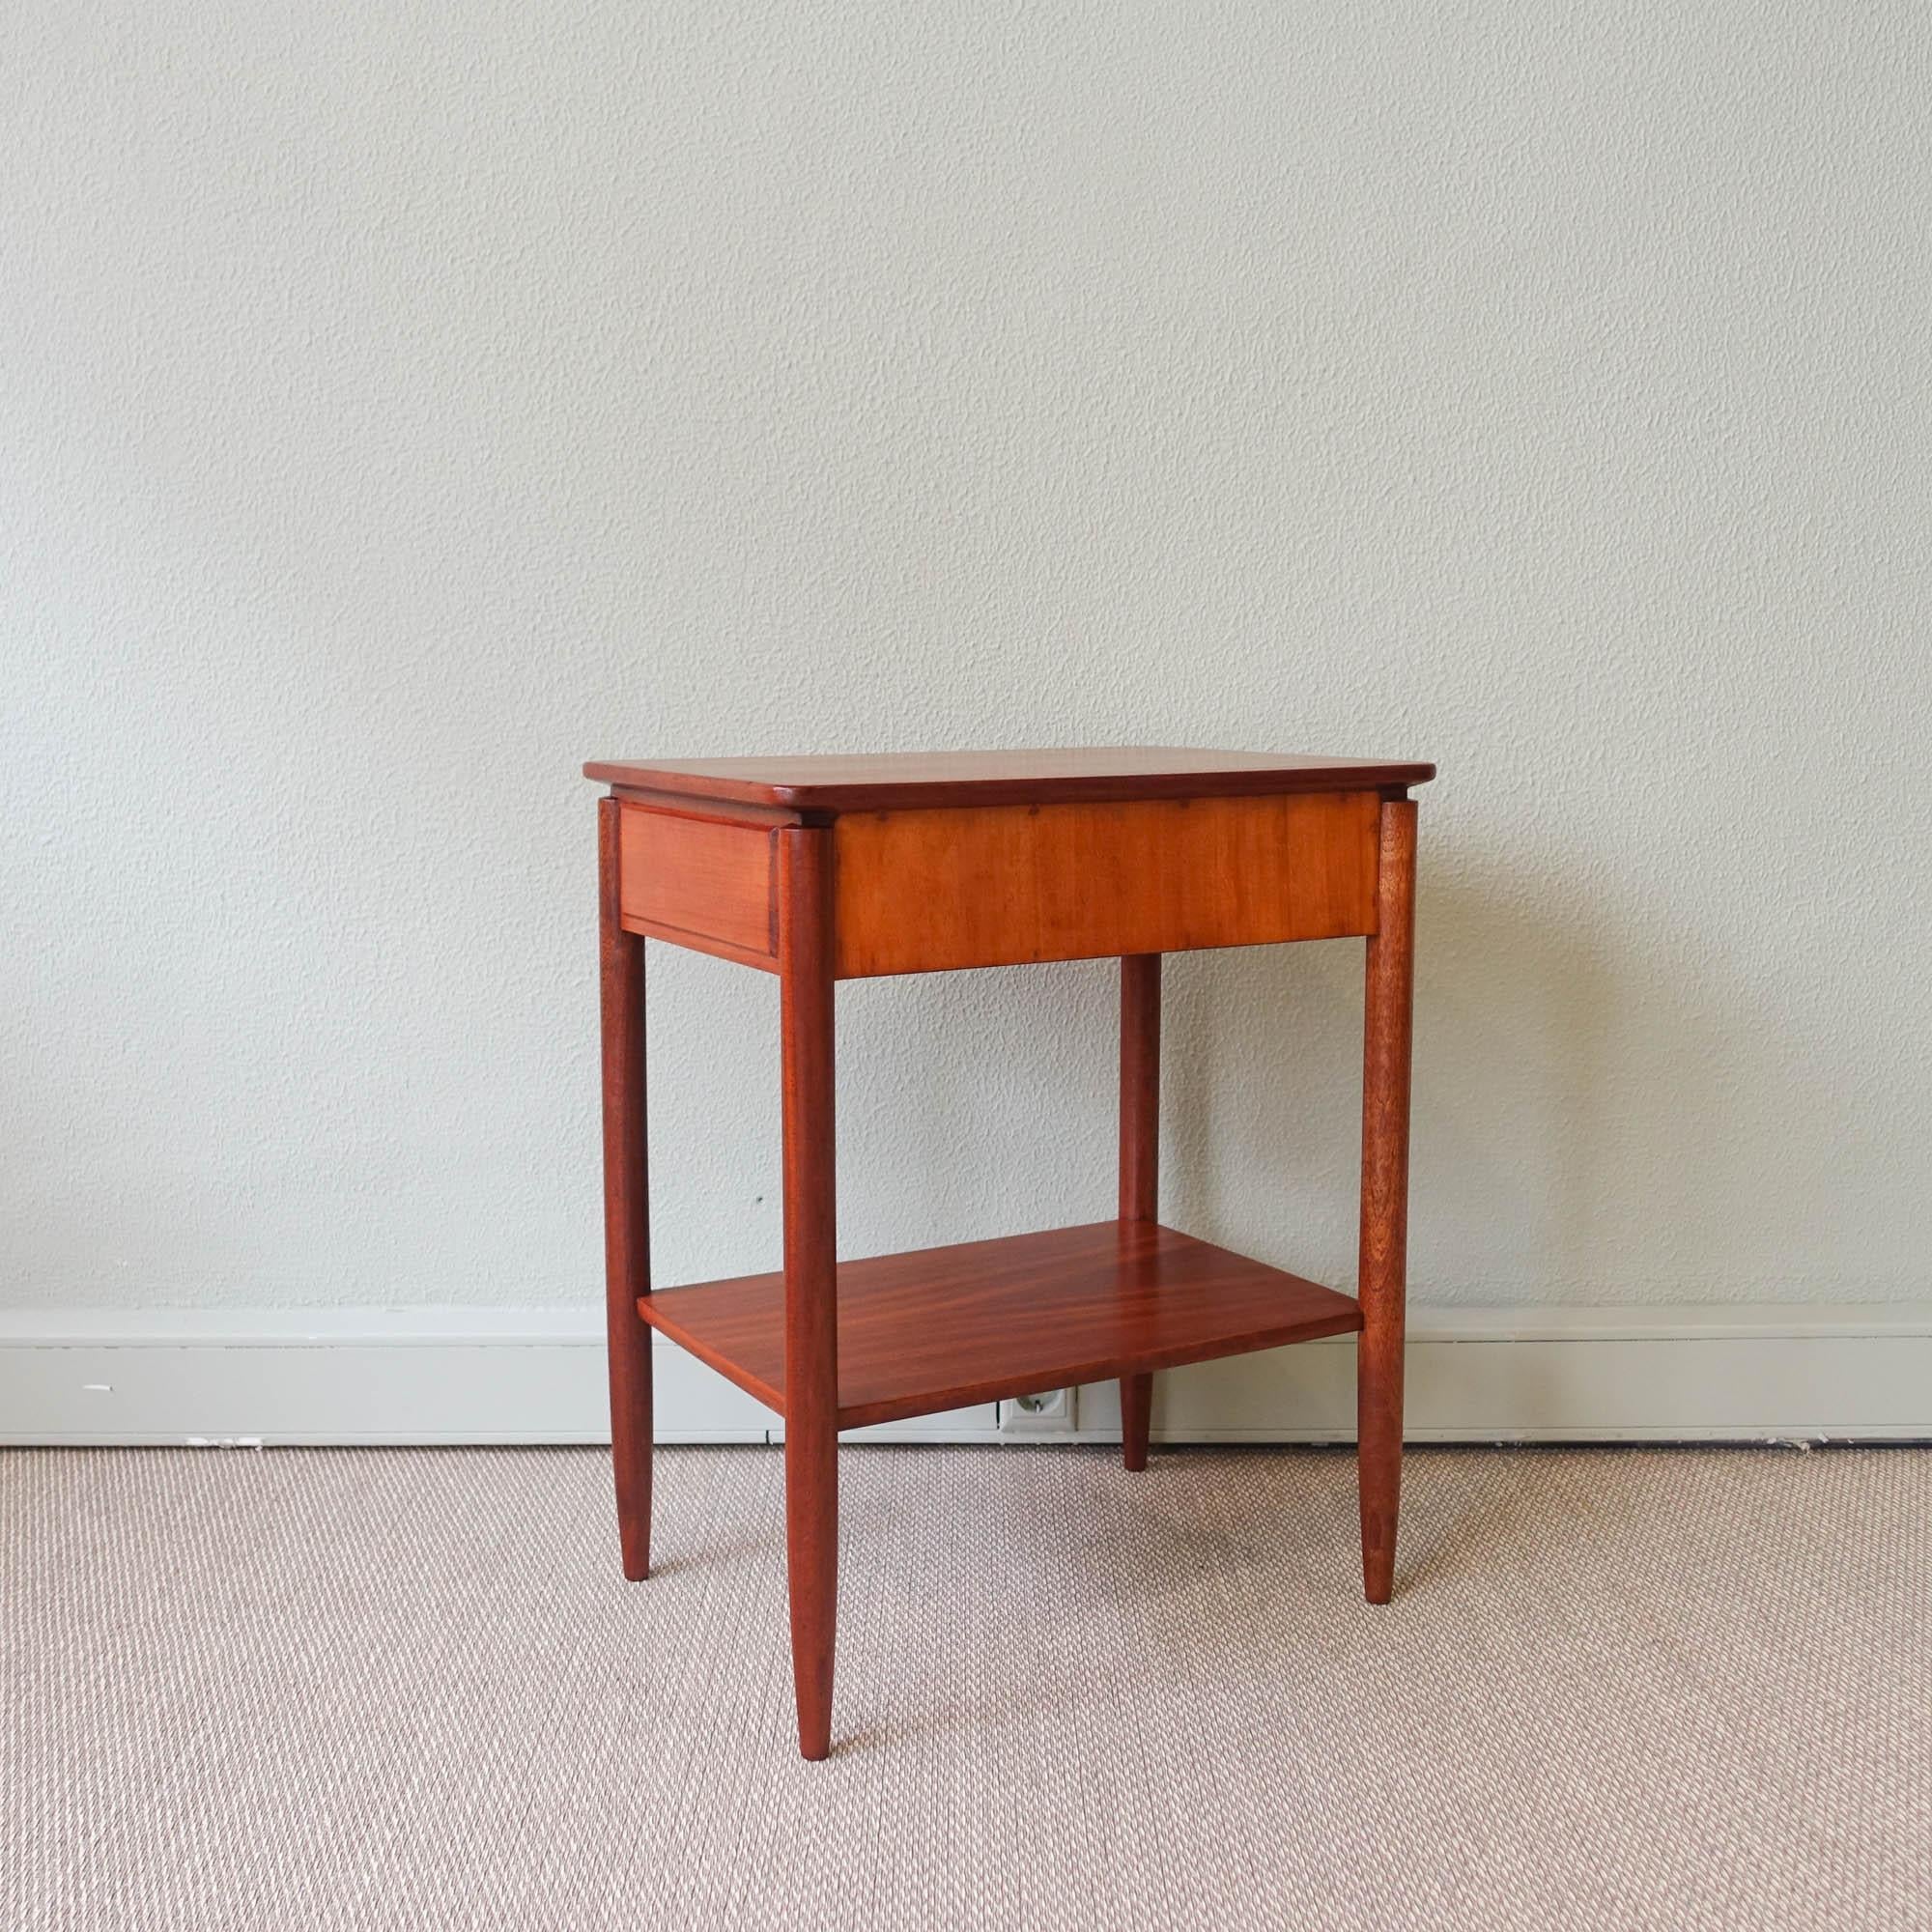 Mid-20th Century Vintage Portuguese Bedside Table by Móveis Olaio, 1960's